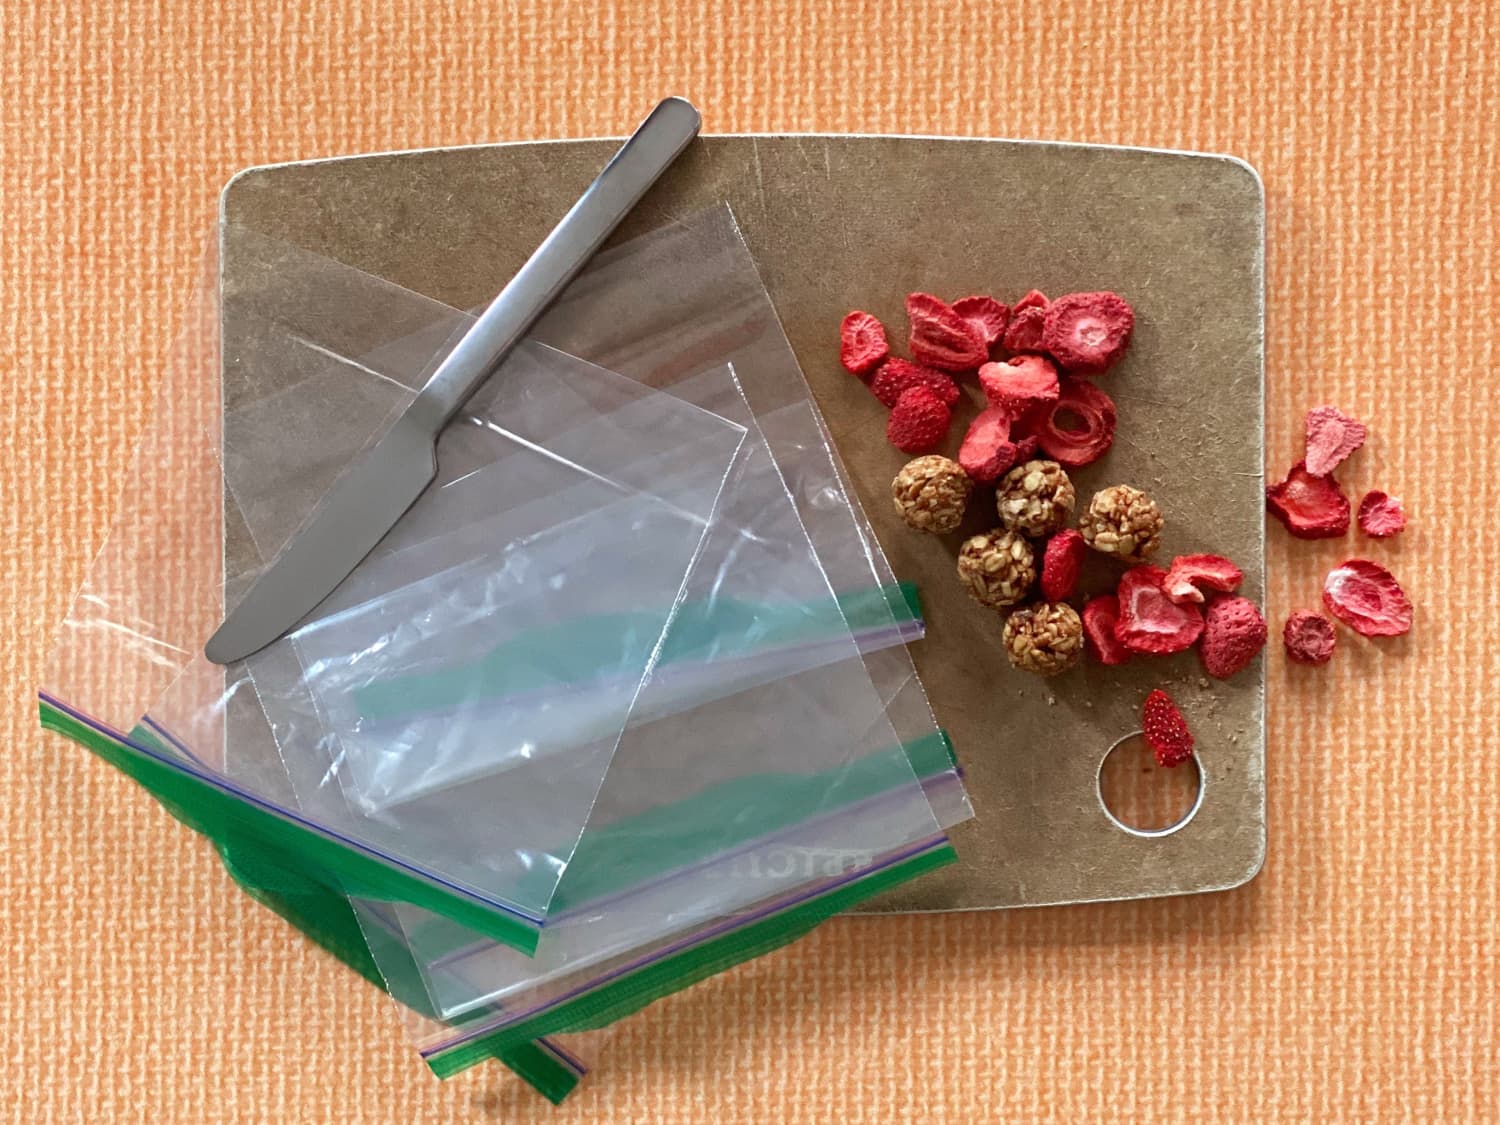 HOW TO MAKE AN AIR TIGHT SEAL IN A PLASTIC BAG 